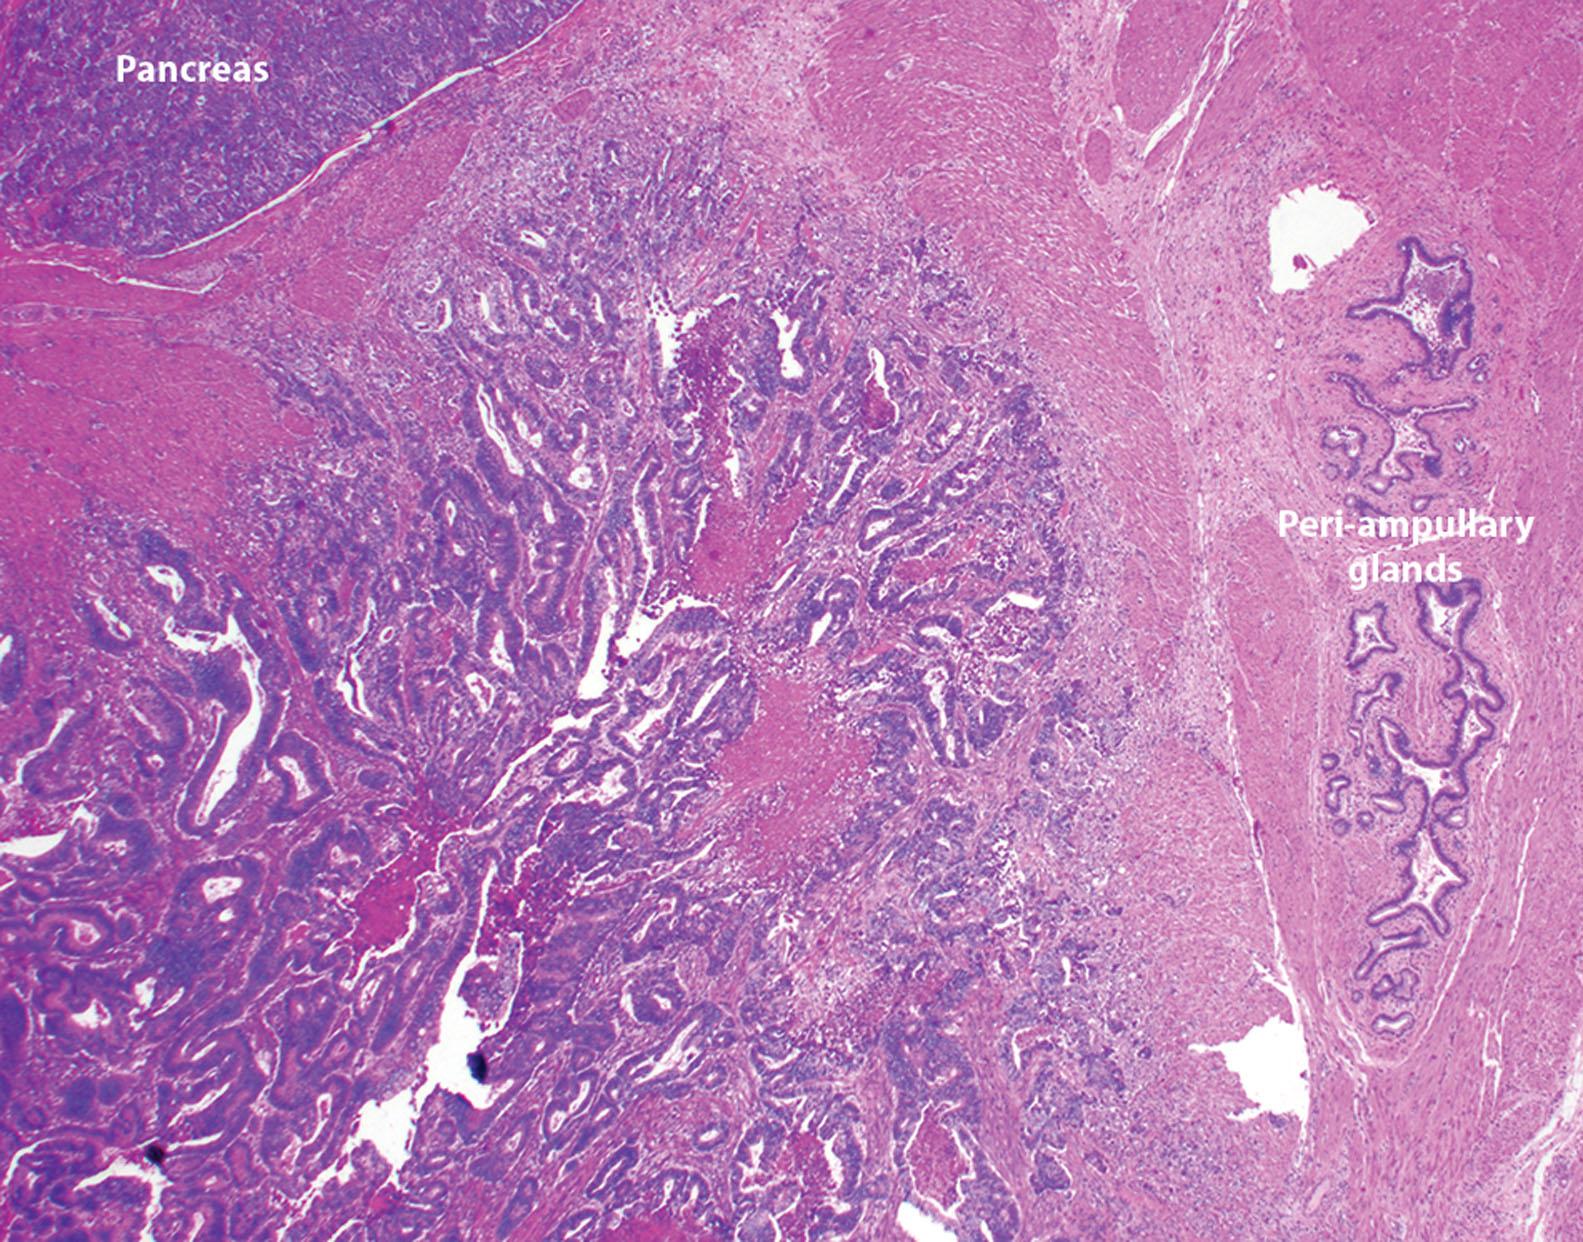 Figure 6.15, Ampullary adenocarcinoma invading through the muscle of the sphincter of Oddi, which contains periampullary glands. The invasive adenocarcinoma closely approaches adjacent pancreatic parenchyma.